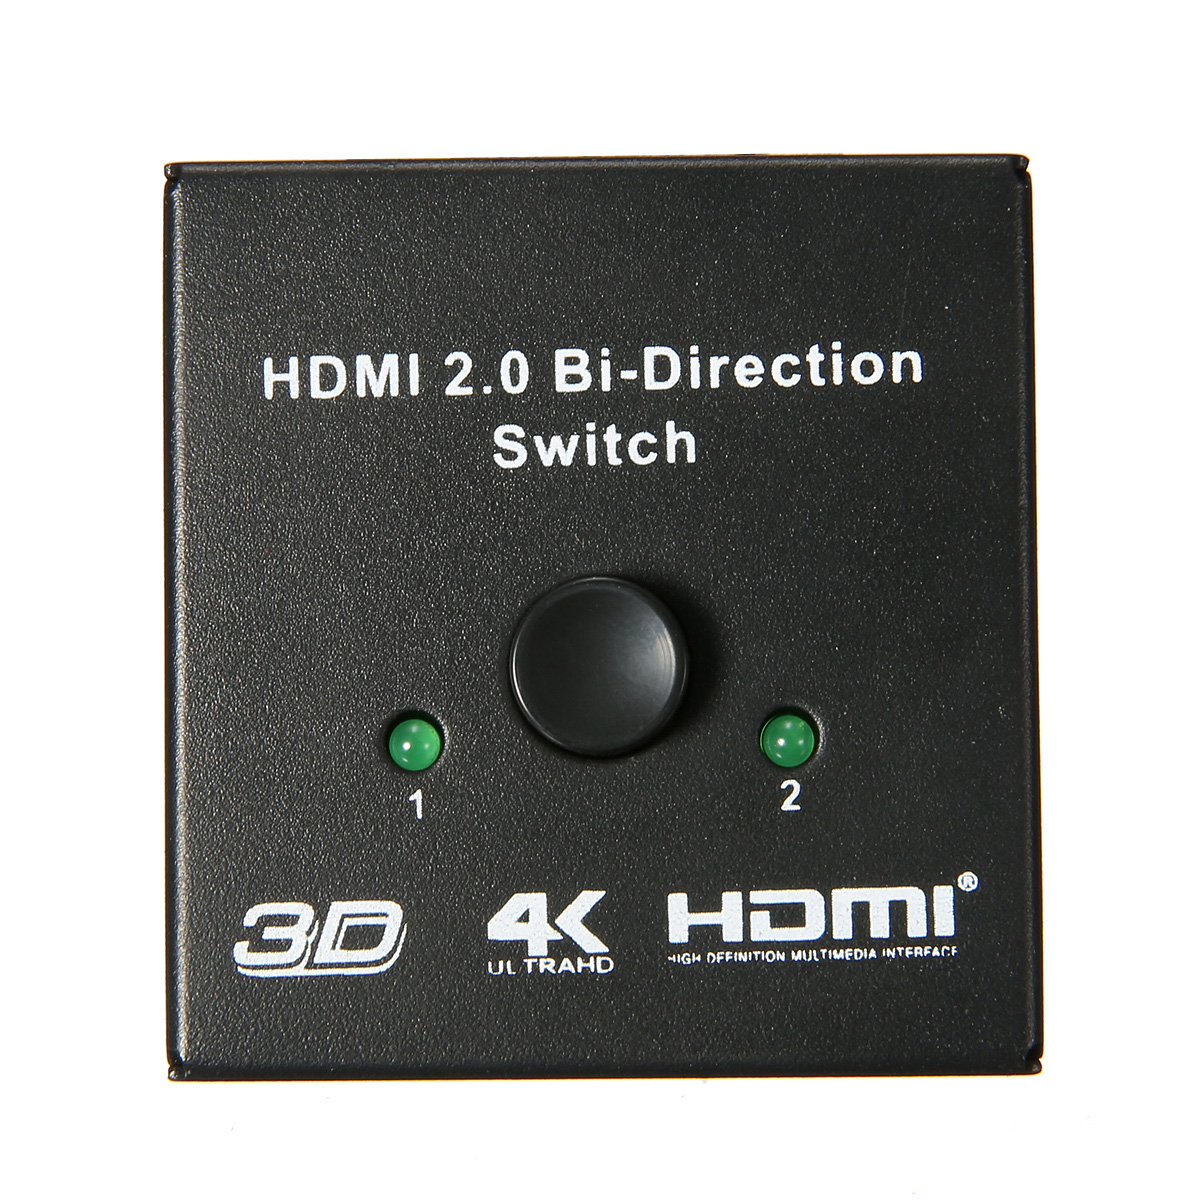 Find HDMI 2 0 HDTV Switch Switcher Splitter Bi Direction Hub HDCP 2x1 1x2 In Out 4K for Sale on Gipsybee.com with cryptocurrencies